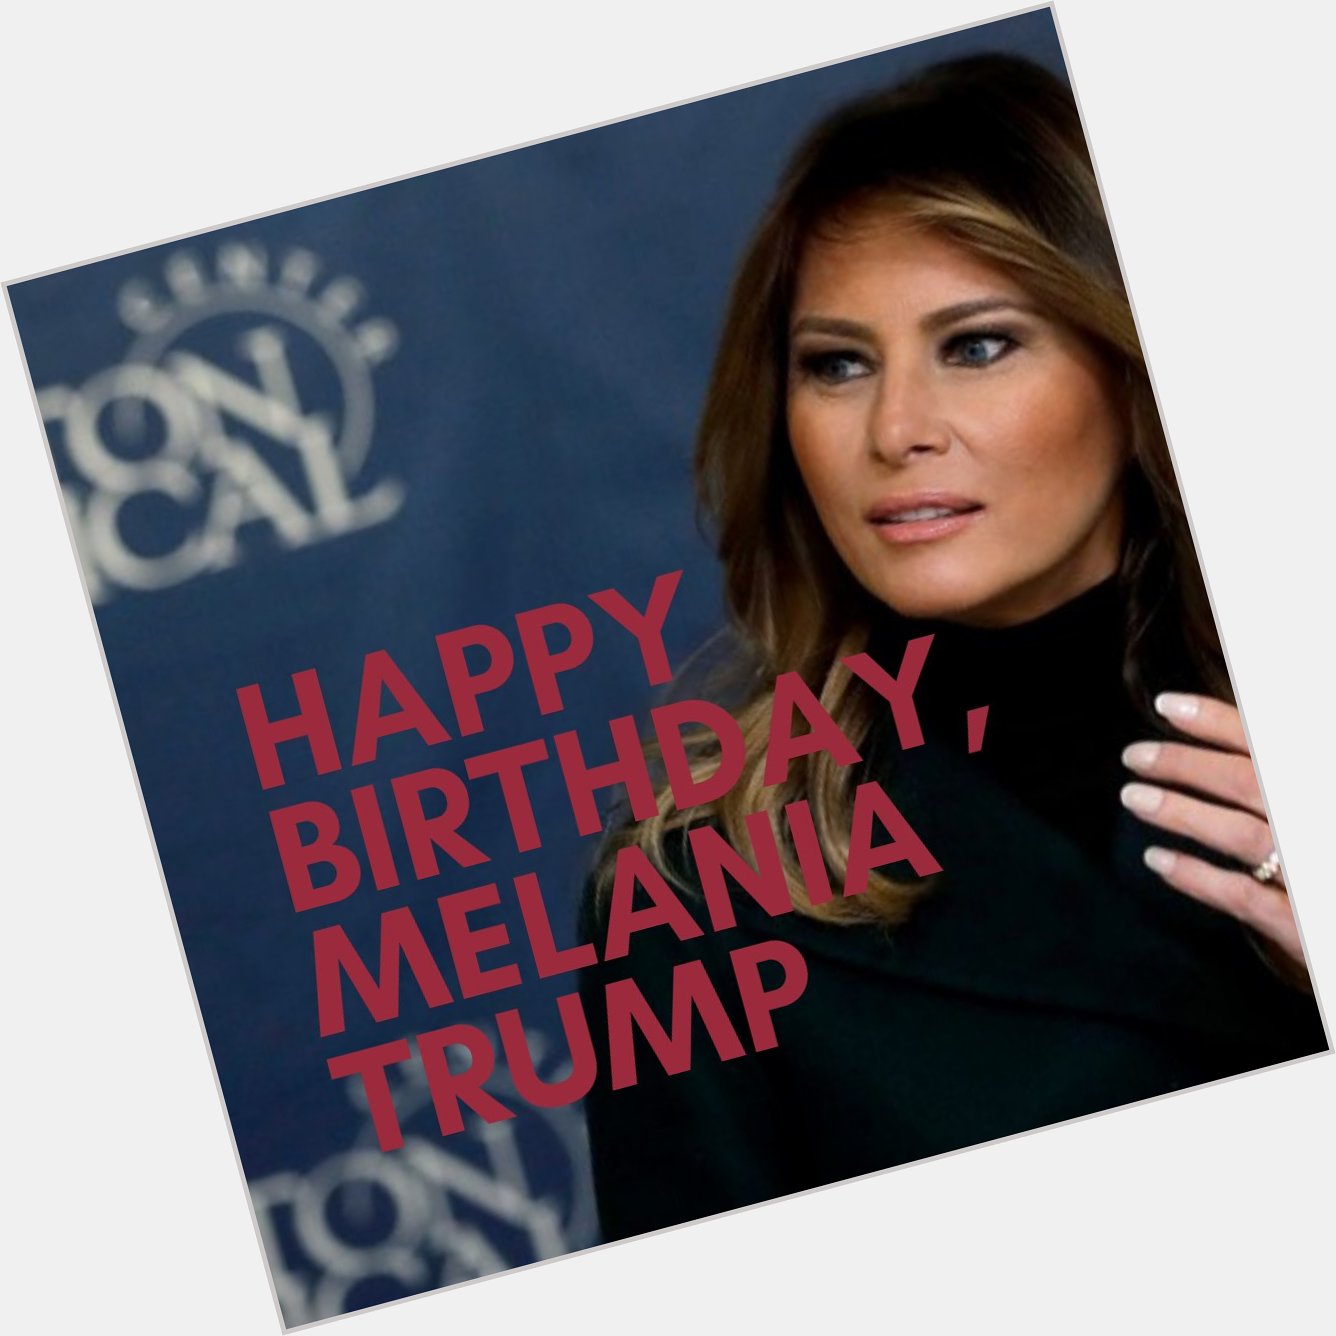 Please join us in wishing a very special happy birthday to First Lady Melania Trump. She turns 50 today! 